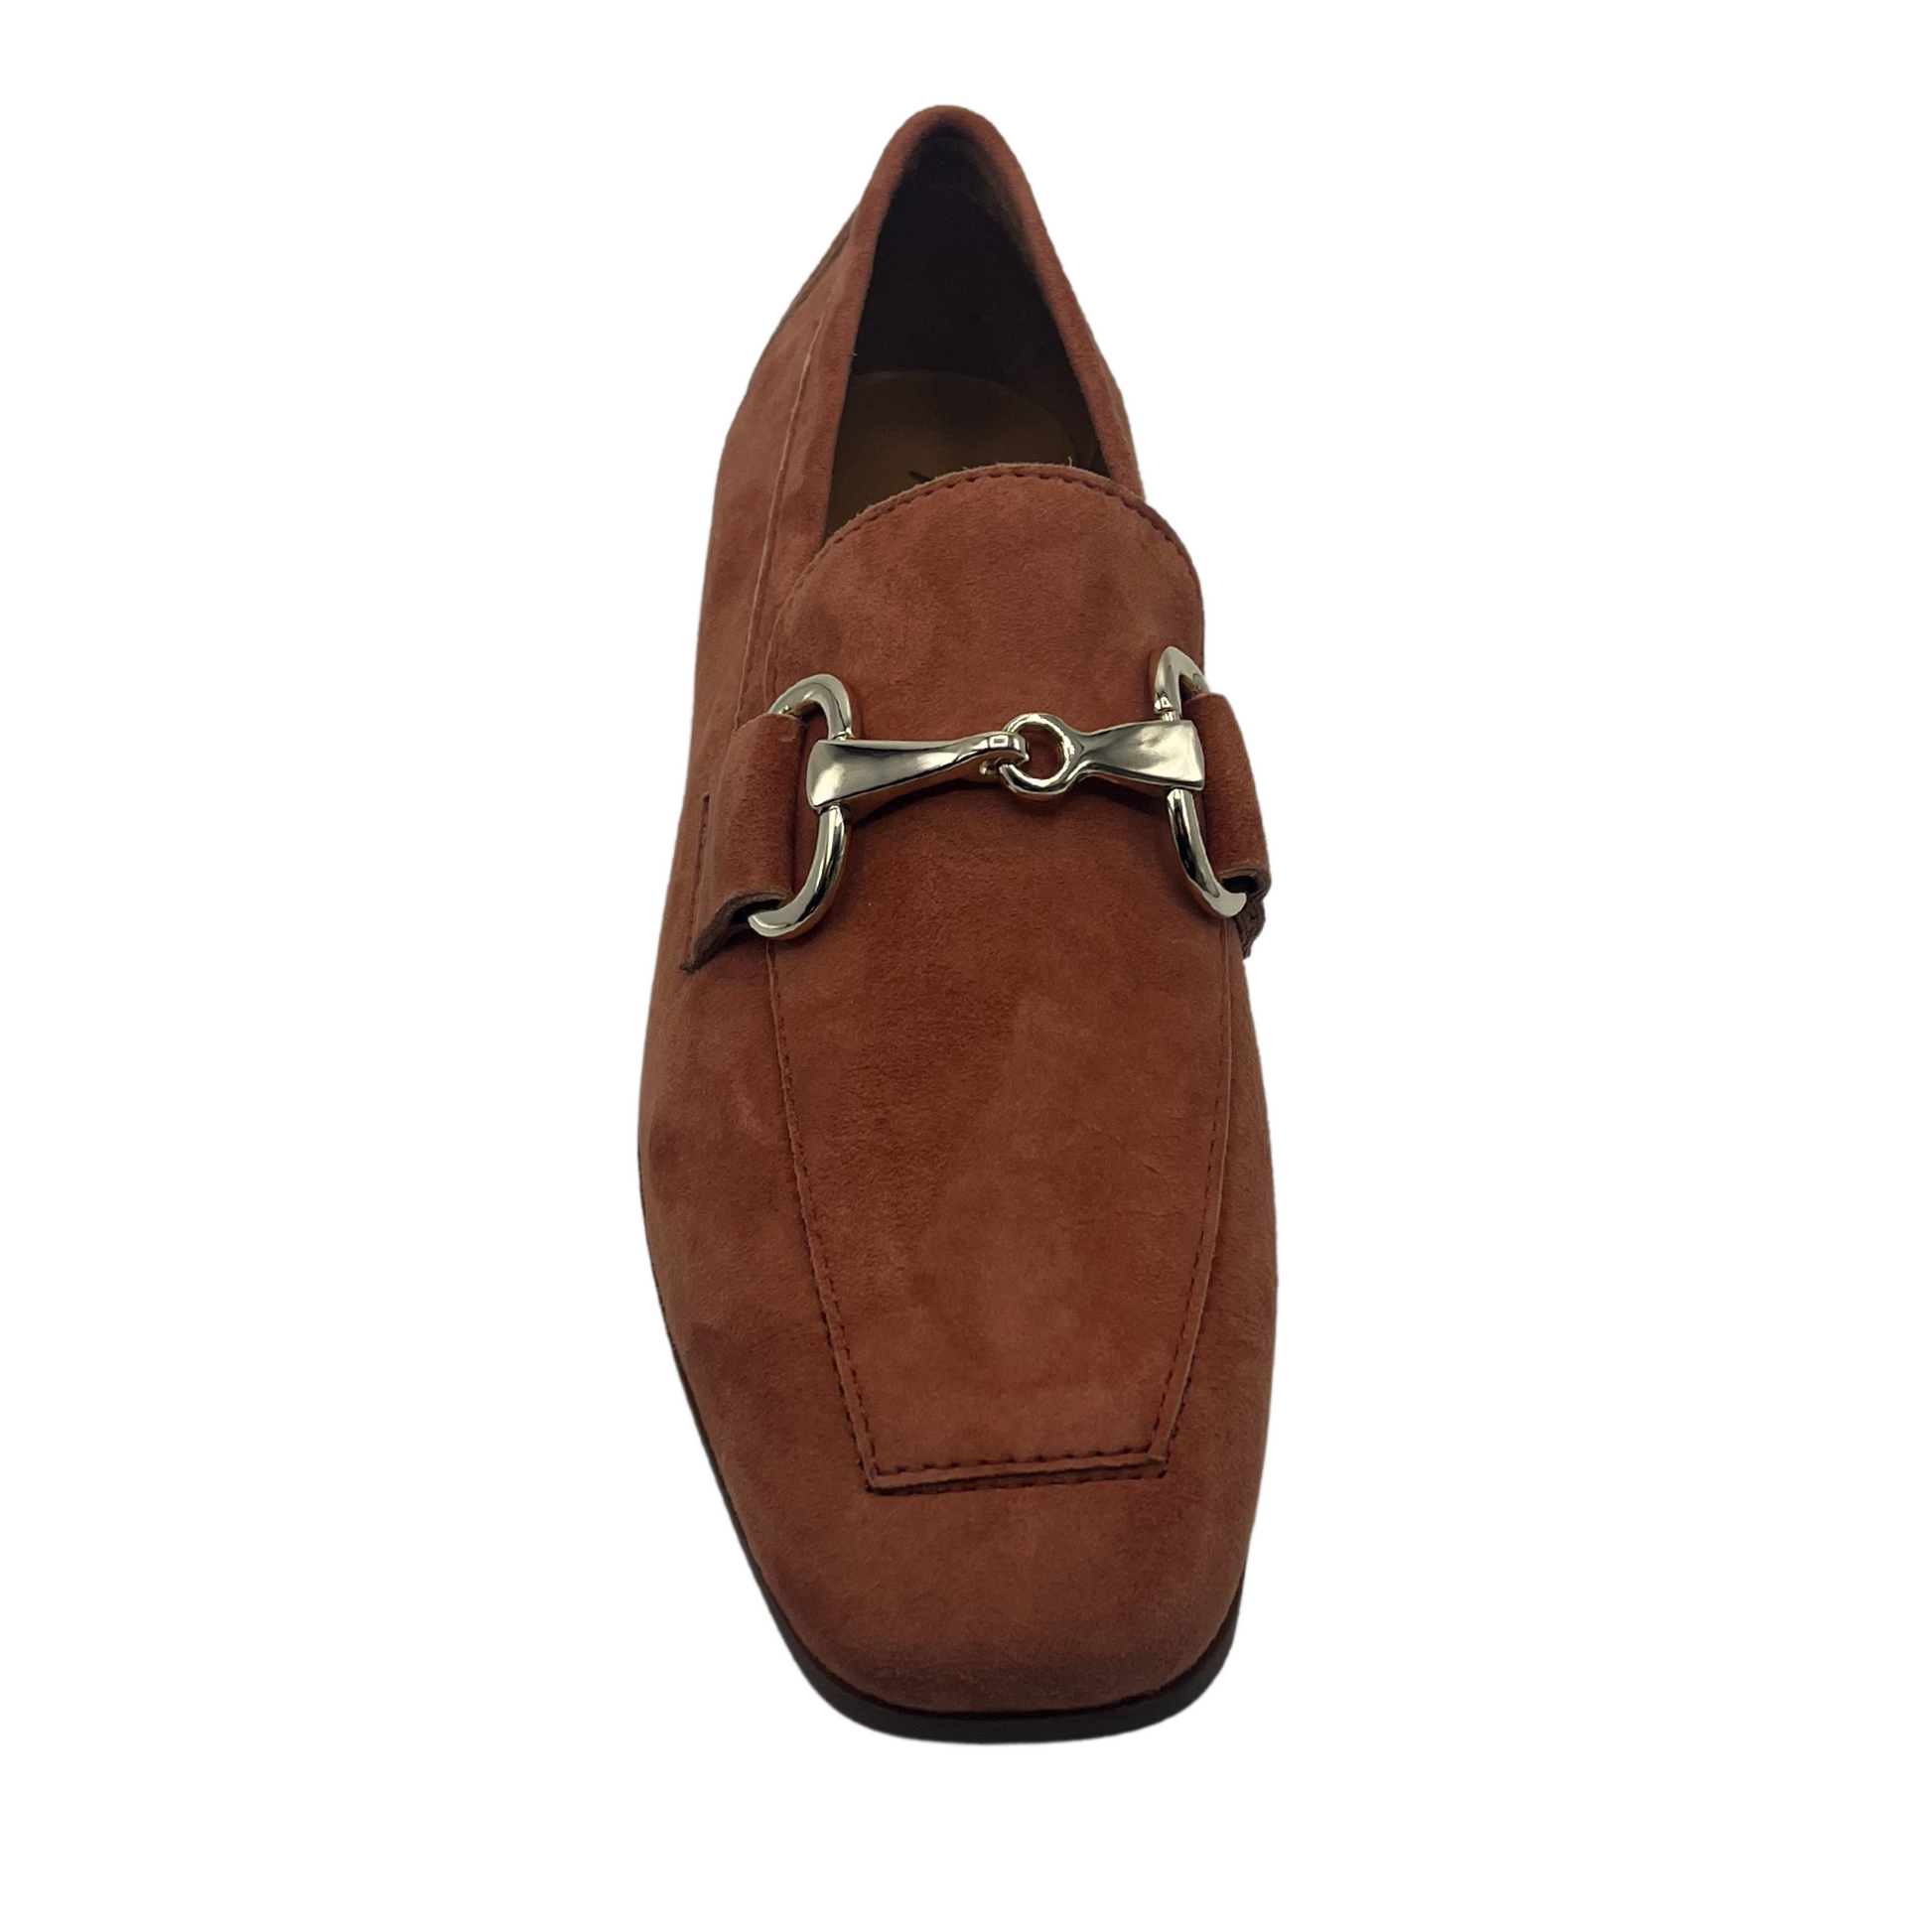 Front view of red brown suede loafer with silver bit detail on upper, square toe and low heel